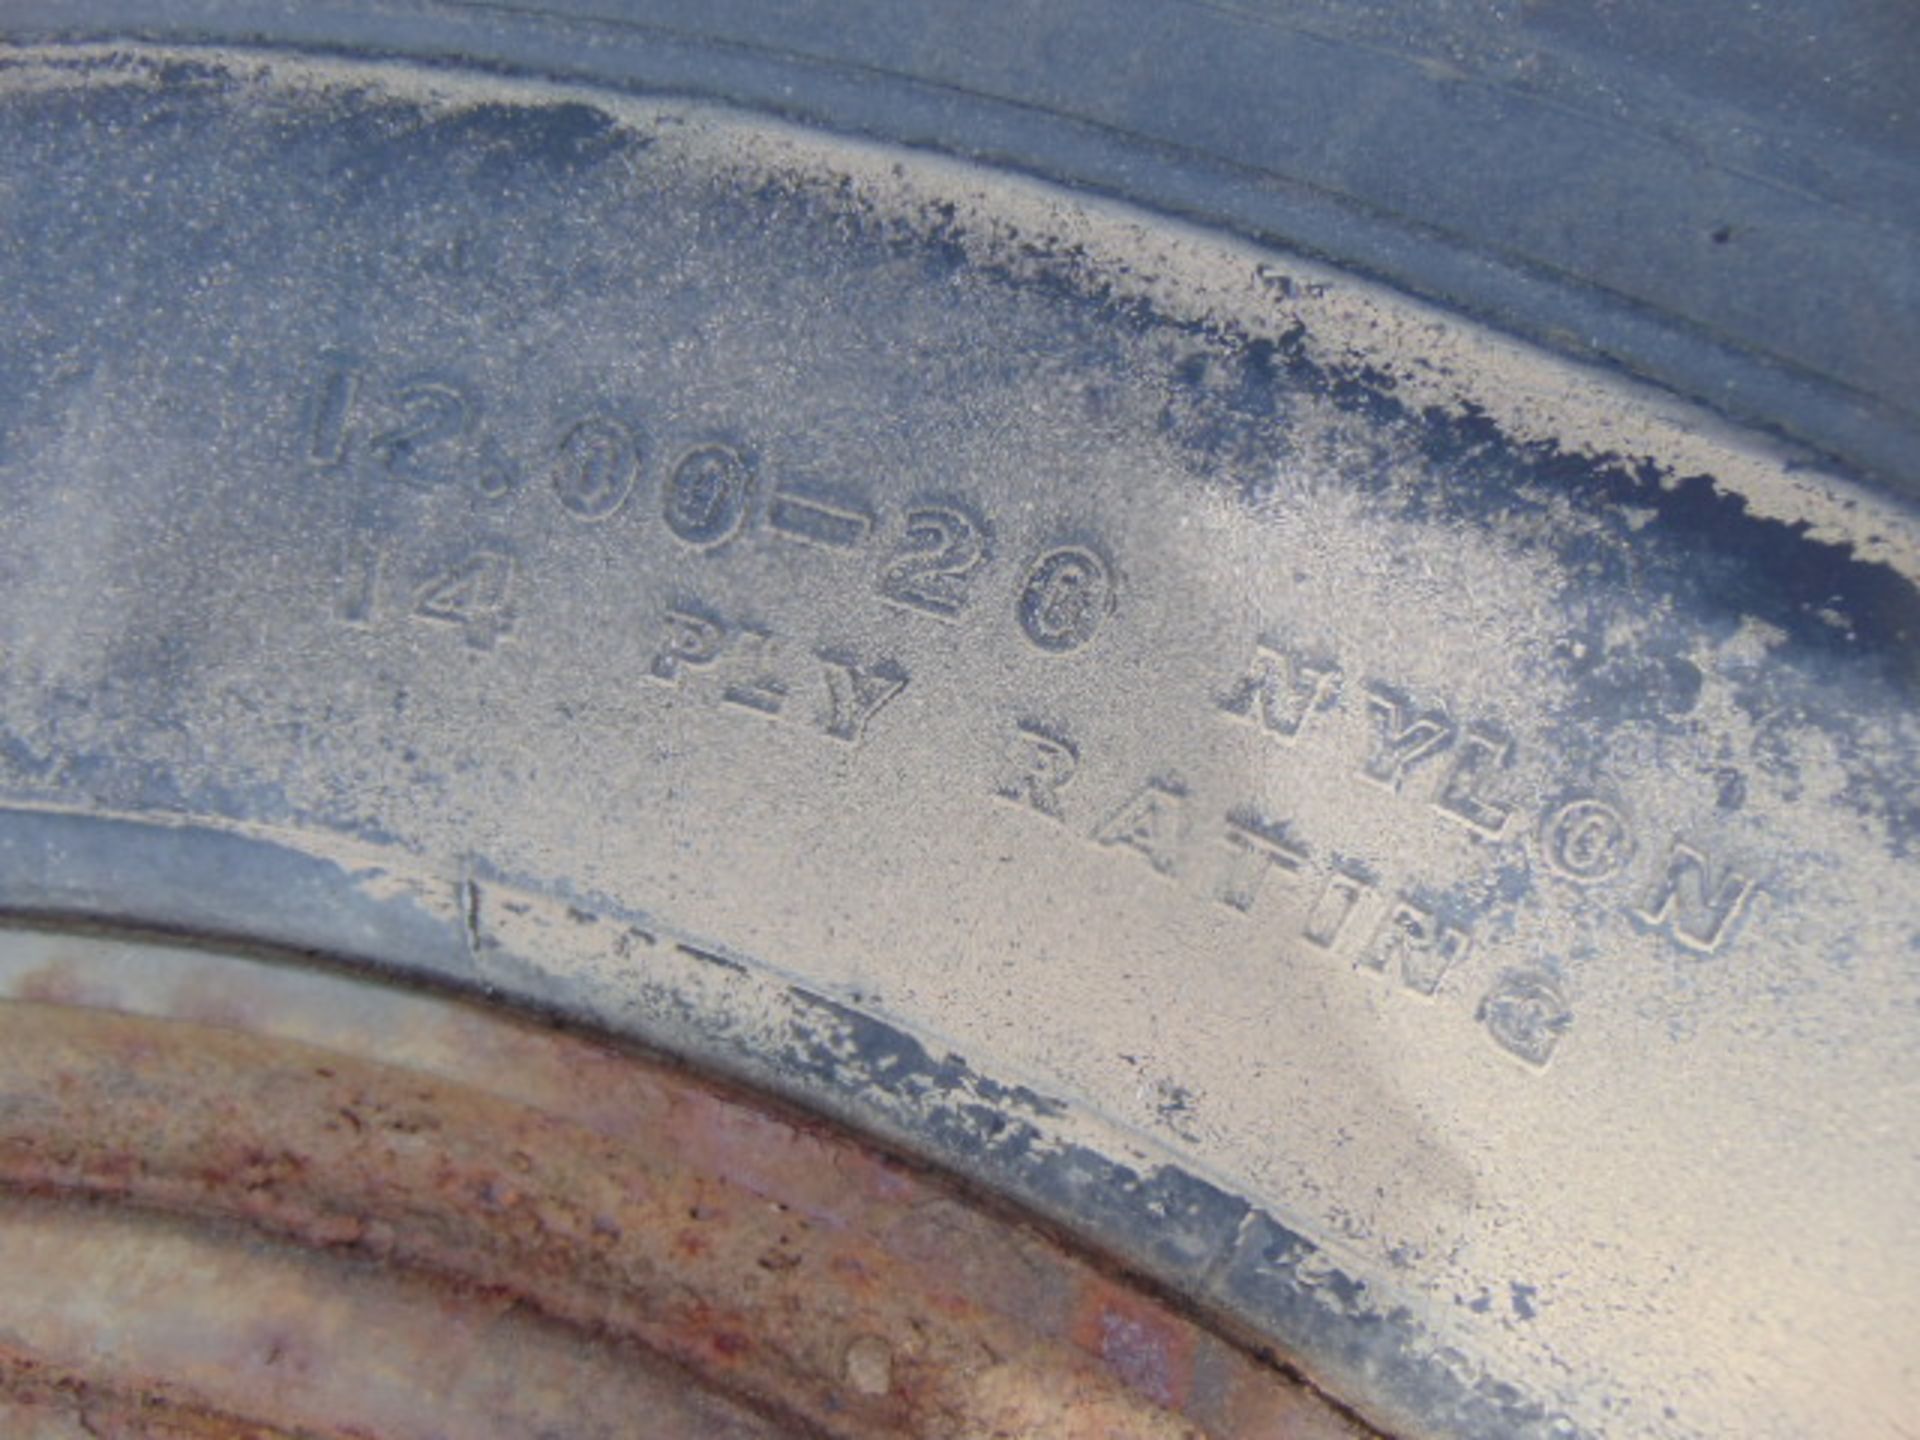 4 x Goodyear 12.00-20 14 Ply Tyres on 10 stud Rims - Image 6 of 6